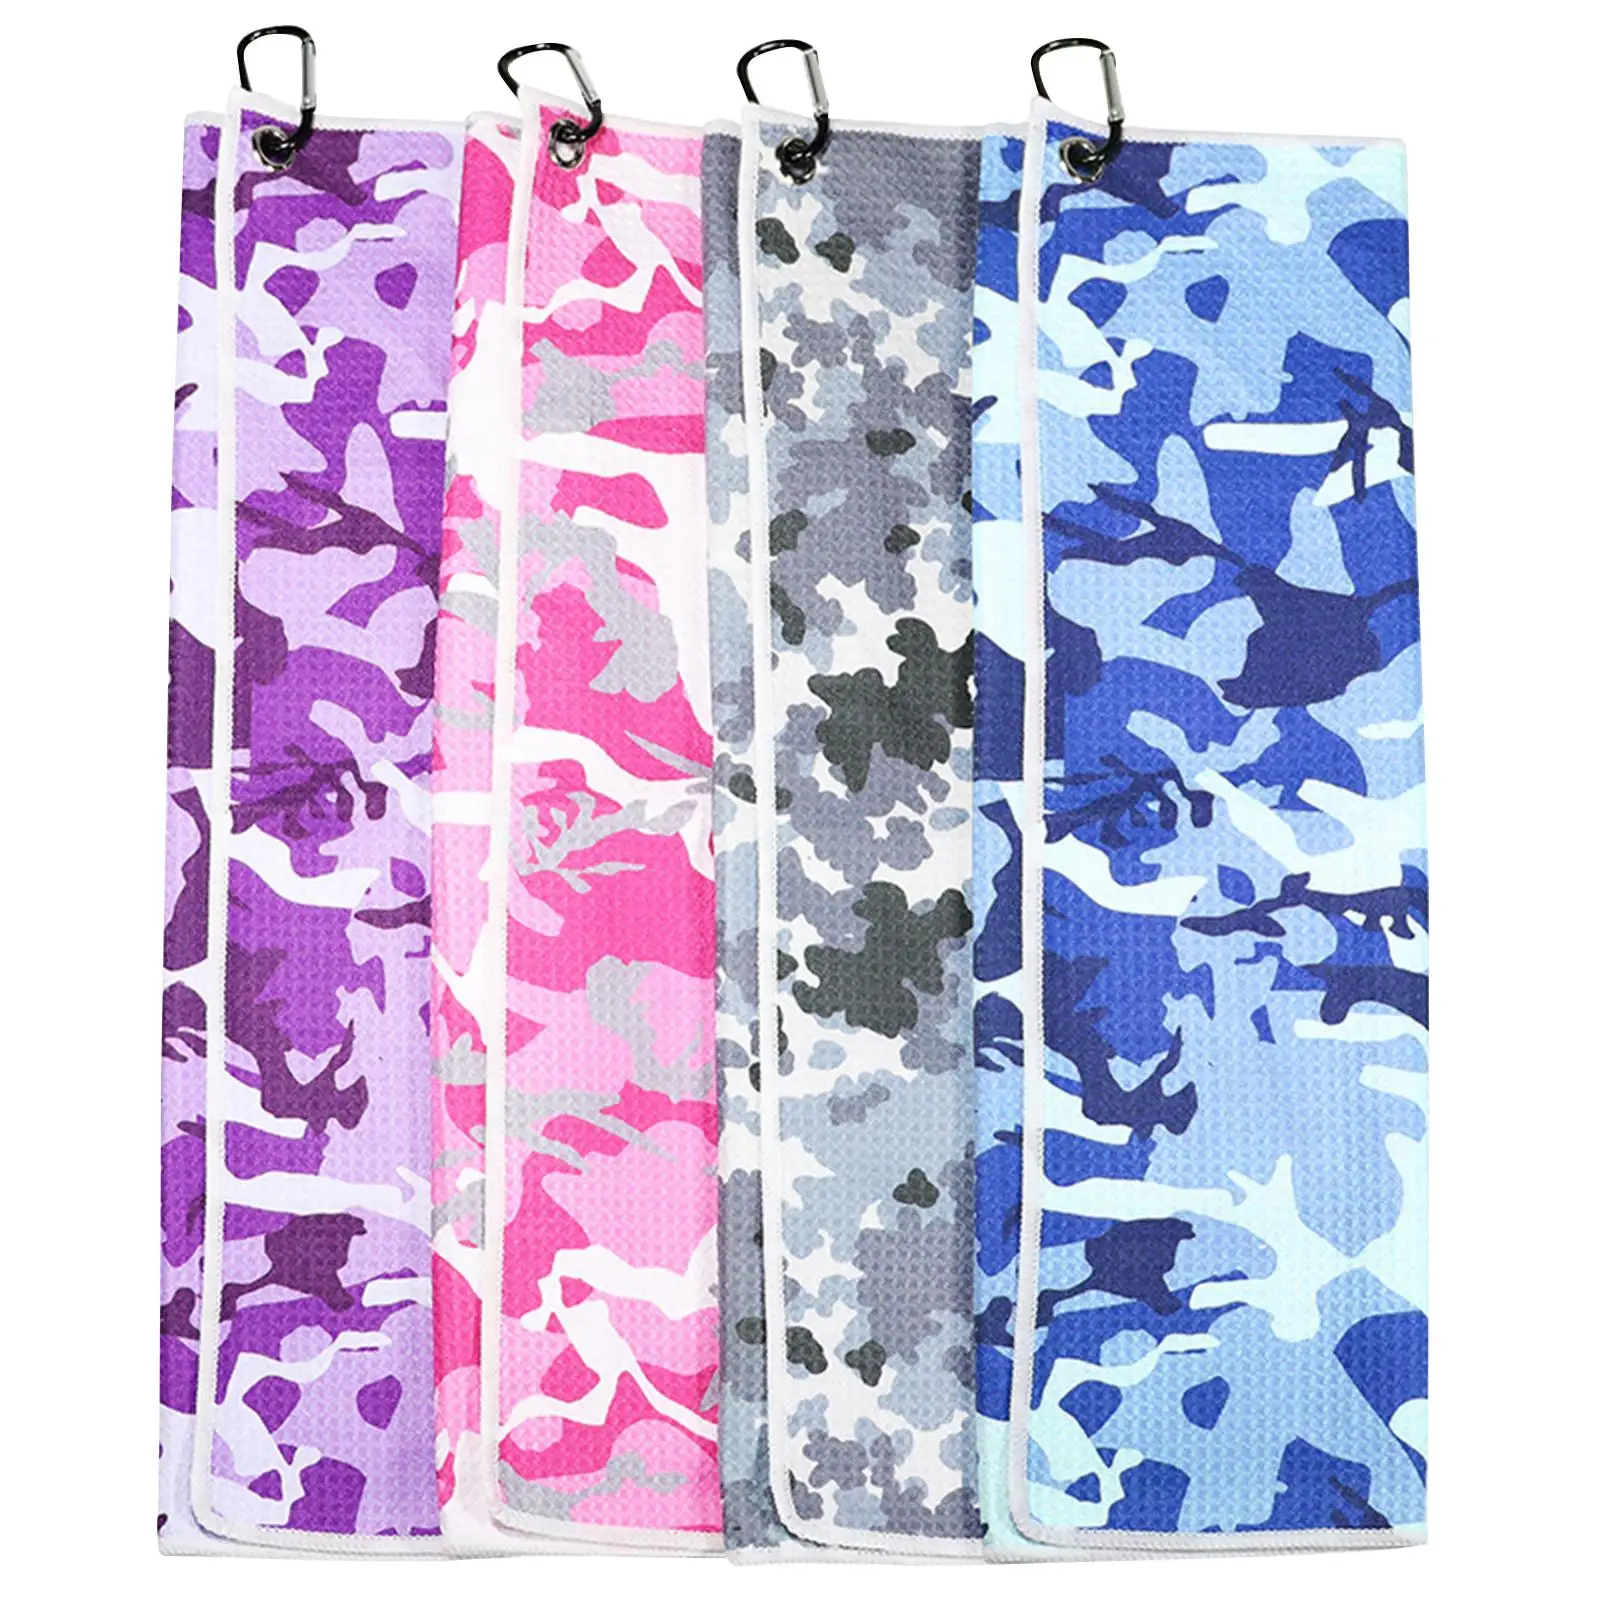 Camo Golf Towel for Golf Bag with Clip Waffle Pattern Cleaning Towels Super